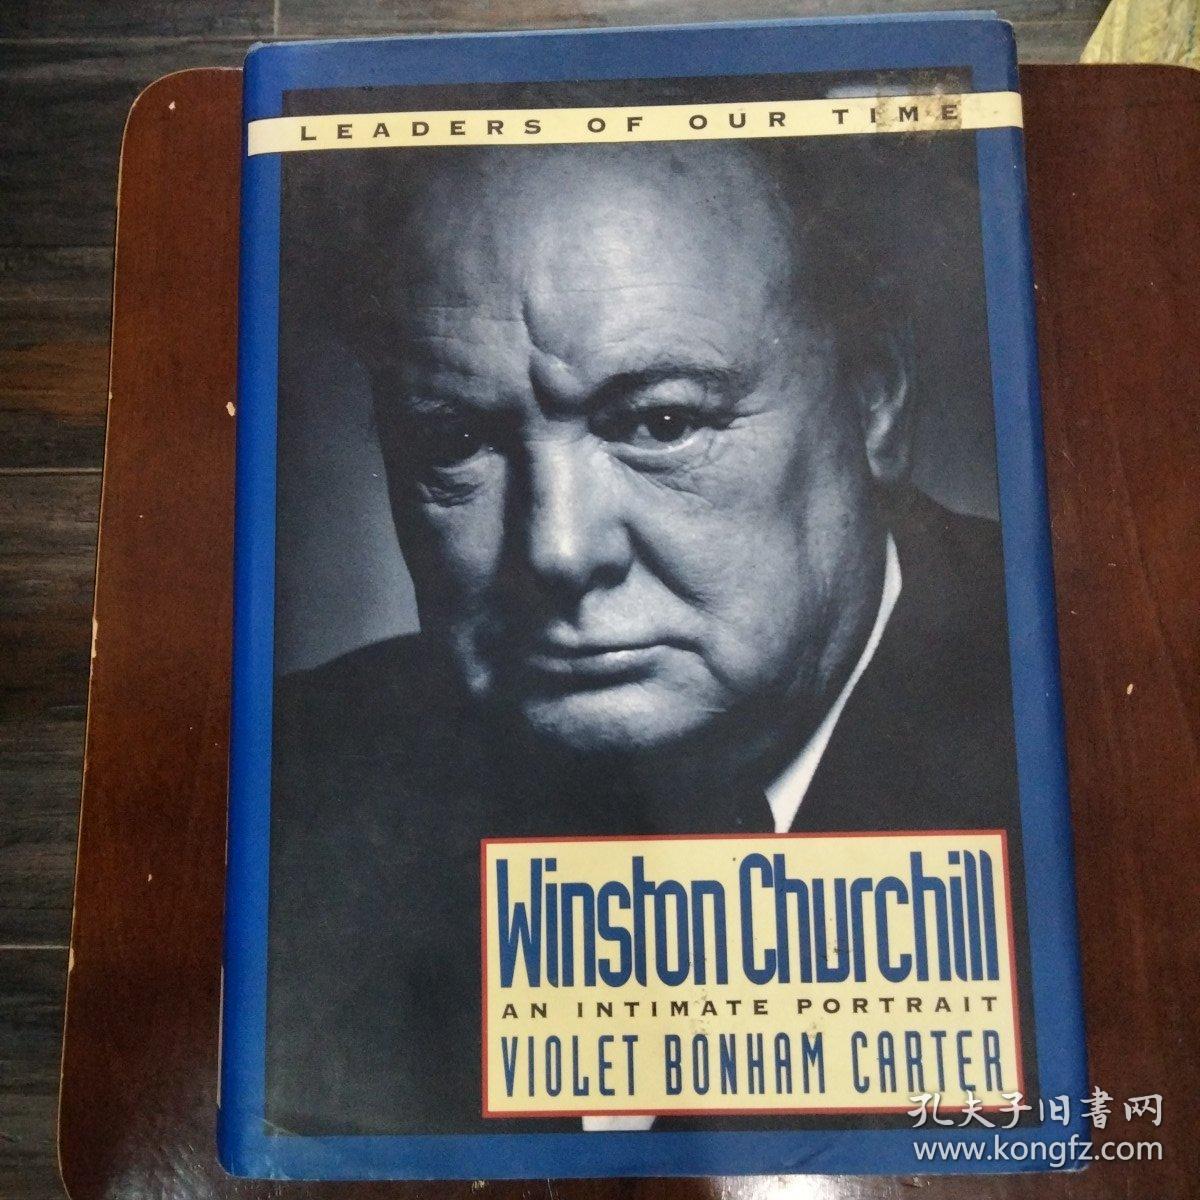 LEADERS OF OUR TIME
Winston Churchill
AN INTIMATE PORTRAIT
VIOLET BONHAM CARTER
丘吉尔